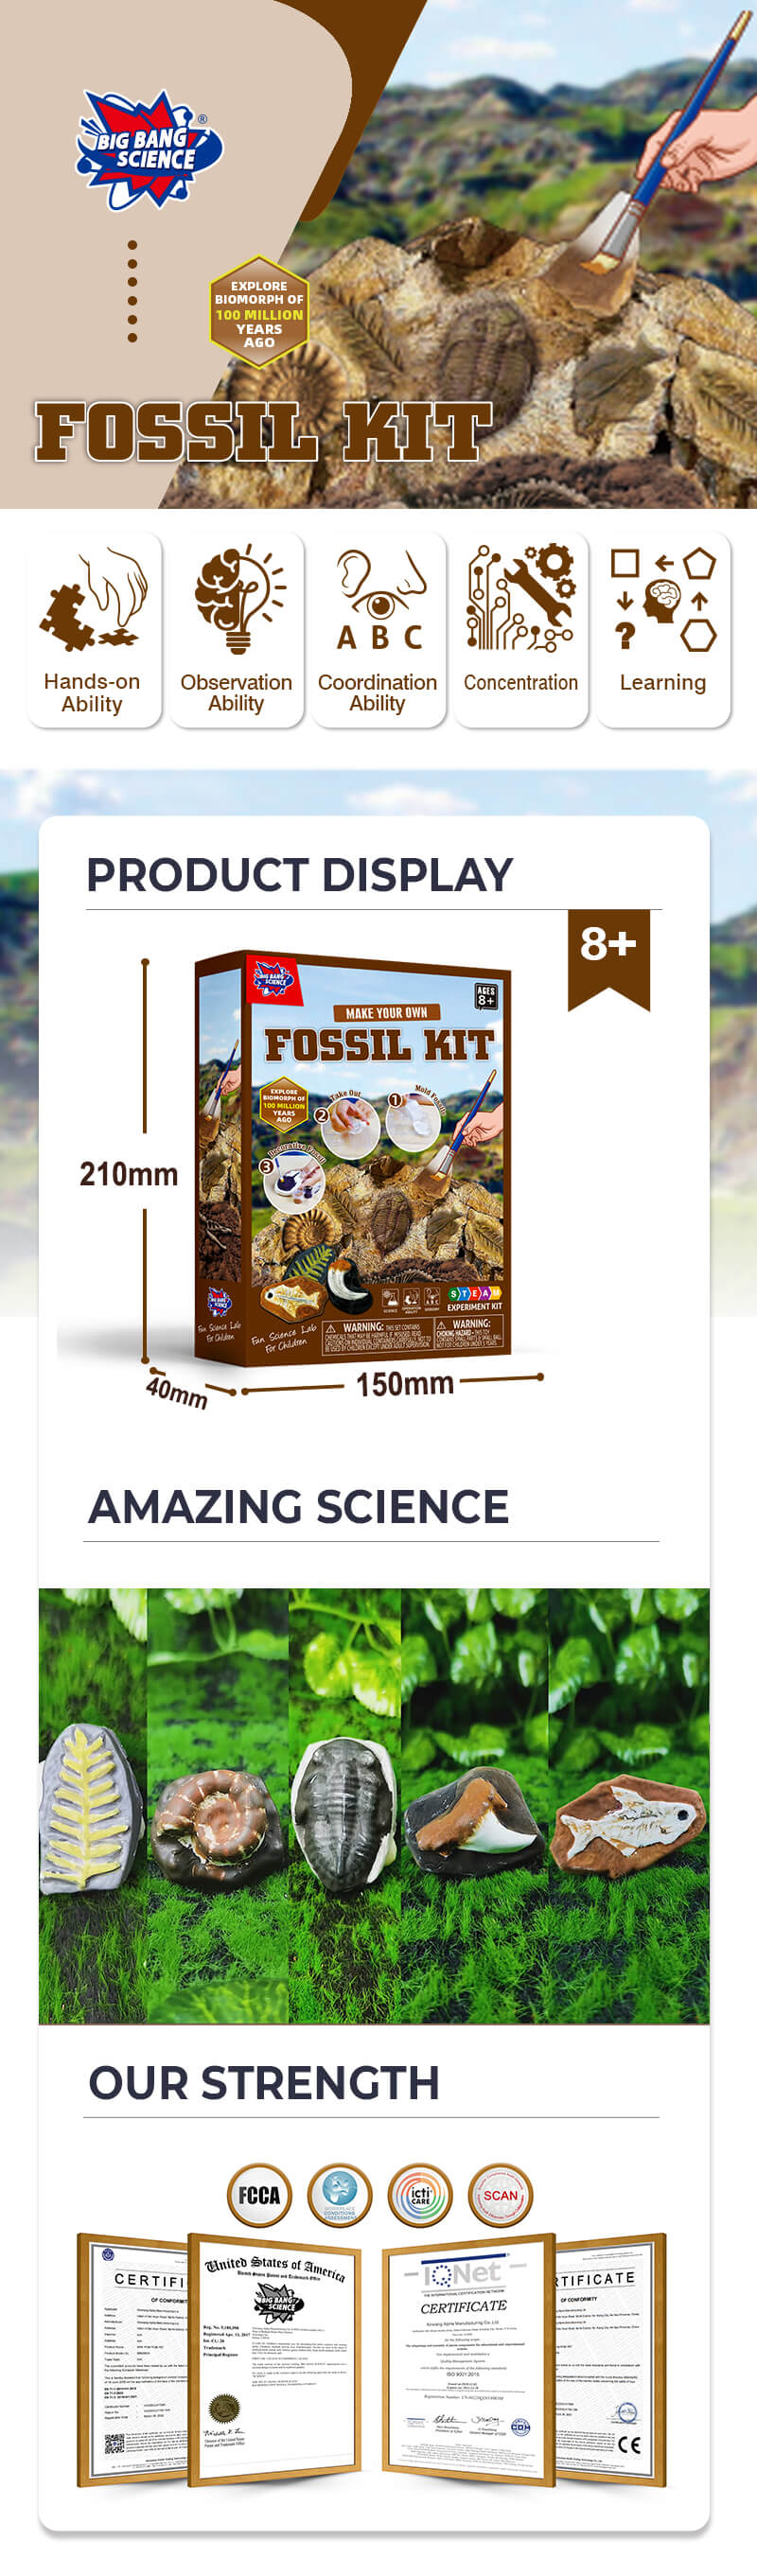 Fossil-Kit-Product-details-chart